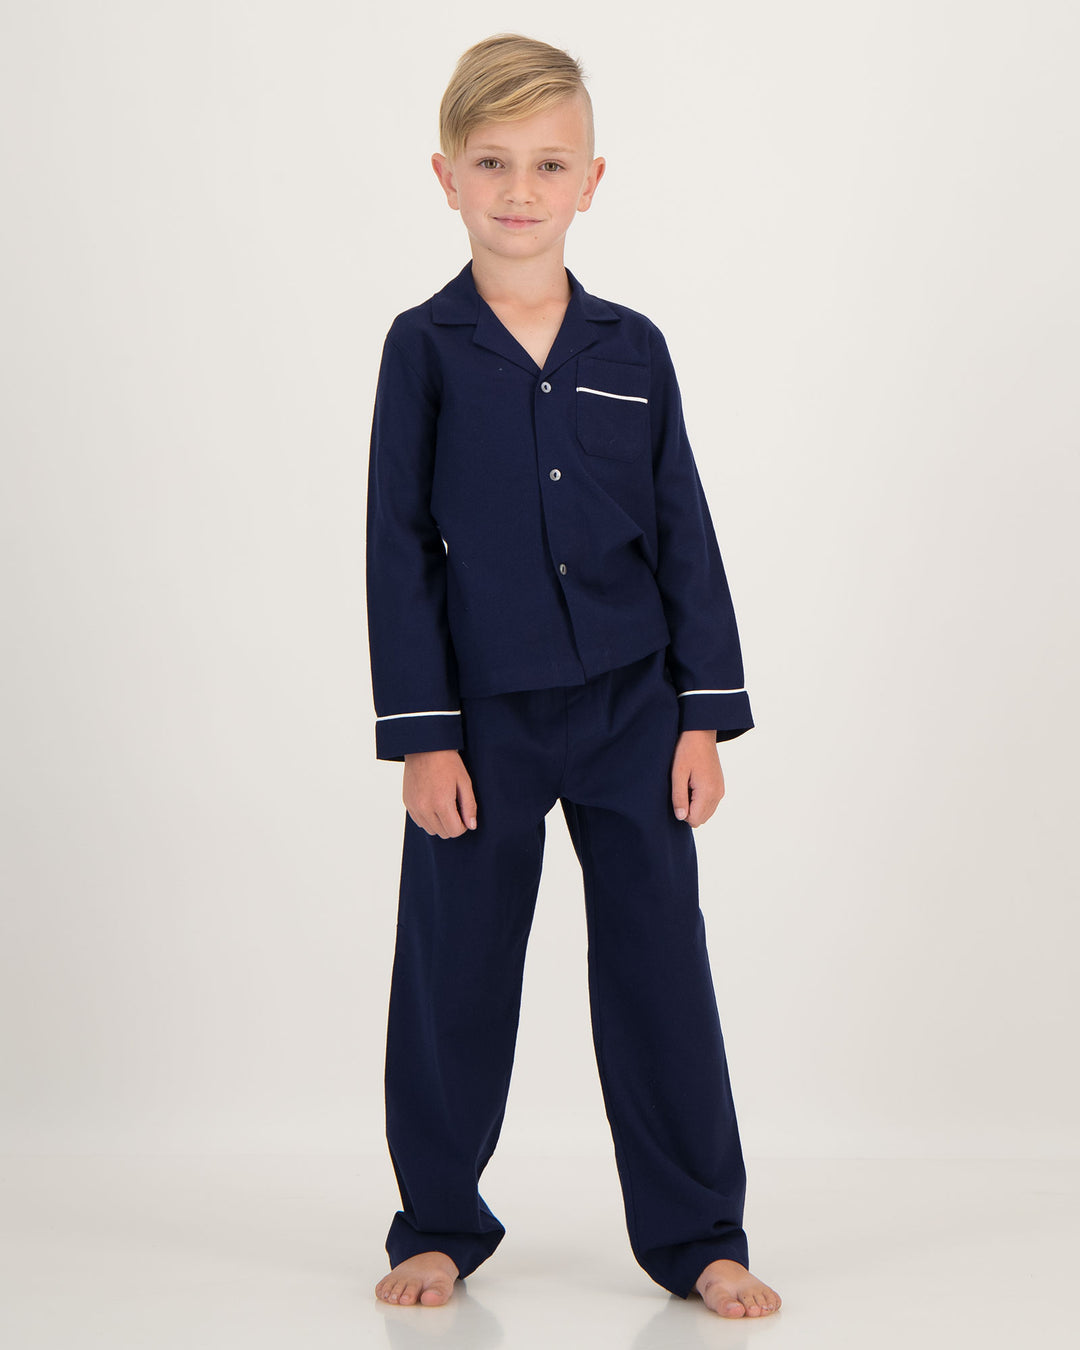 Boys Long Flannel Pyjamas Navy with White Piping Front - Woodstock Laundry SA